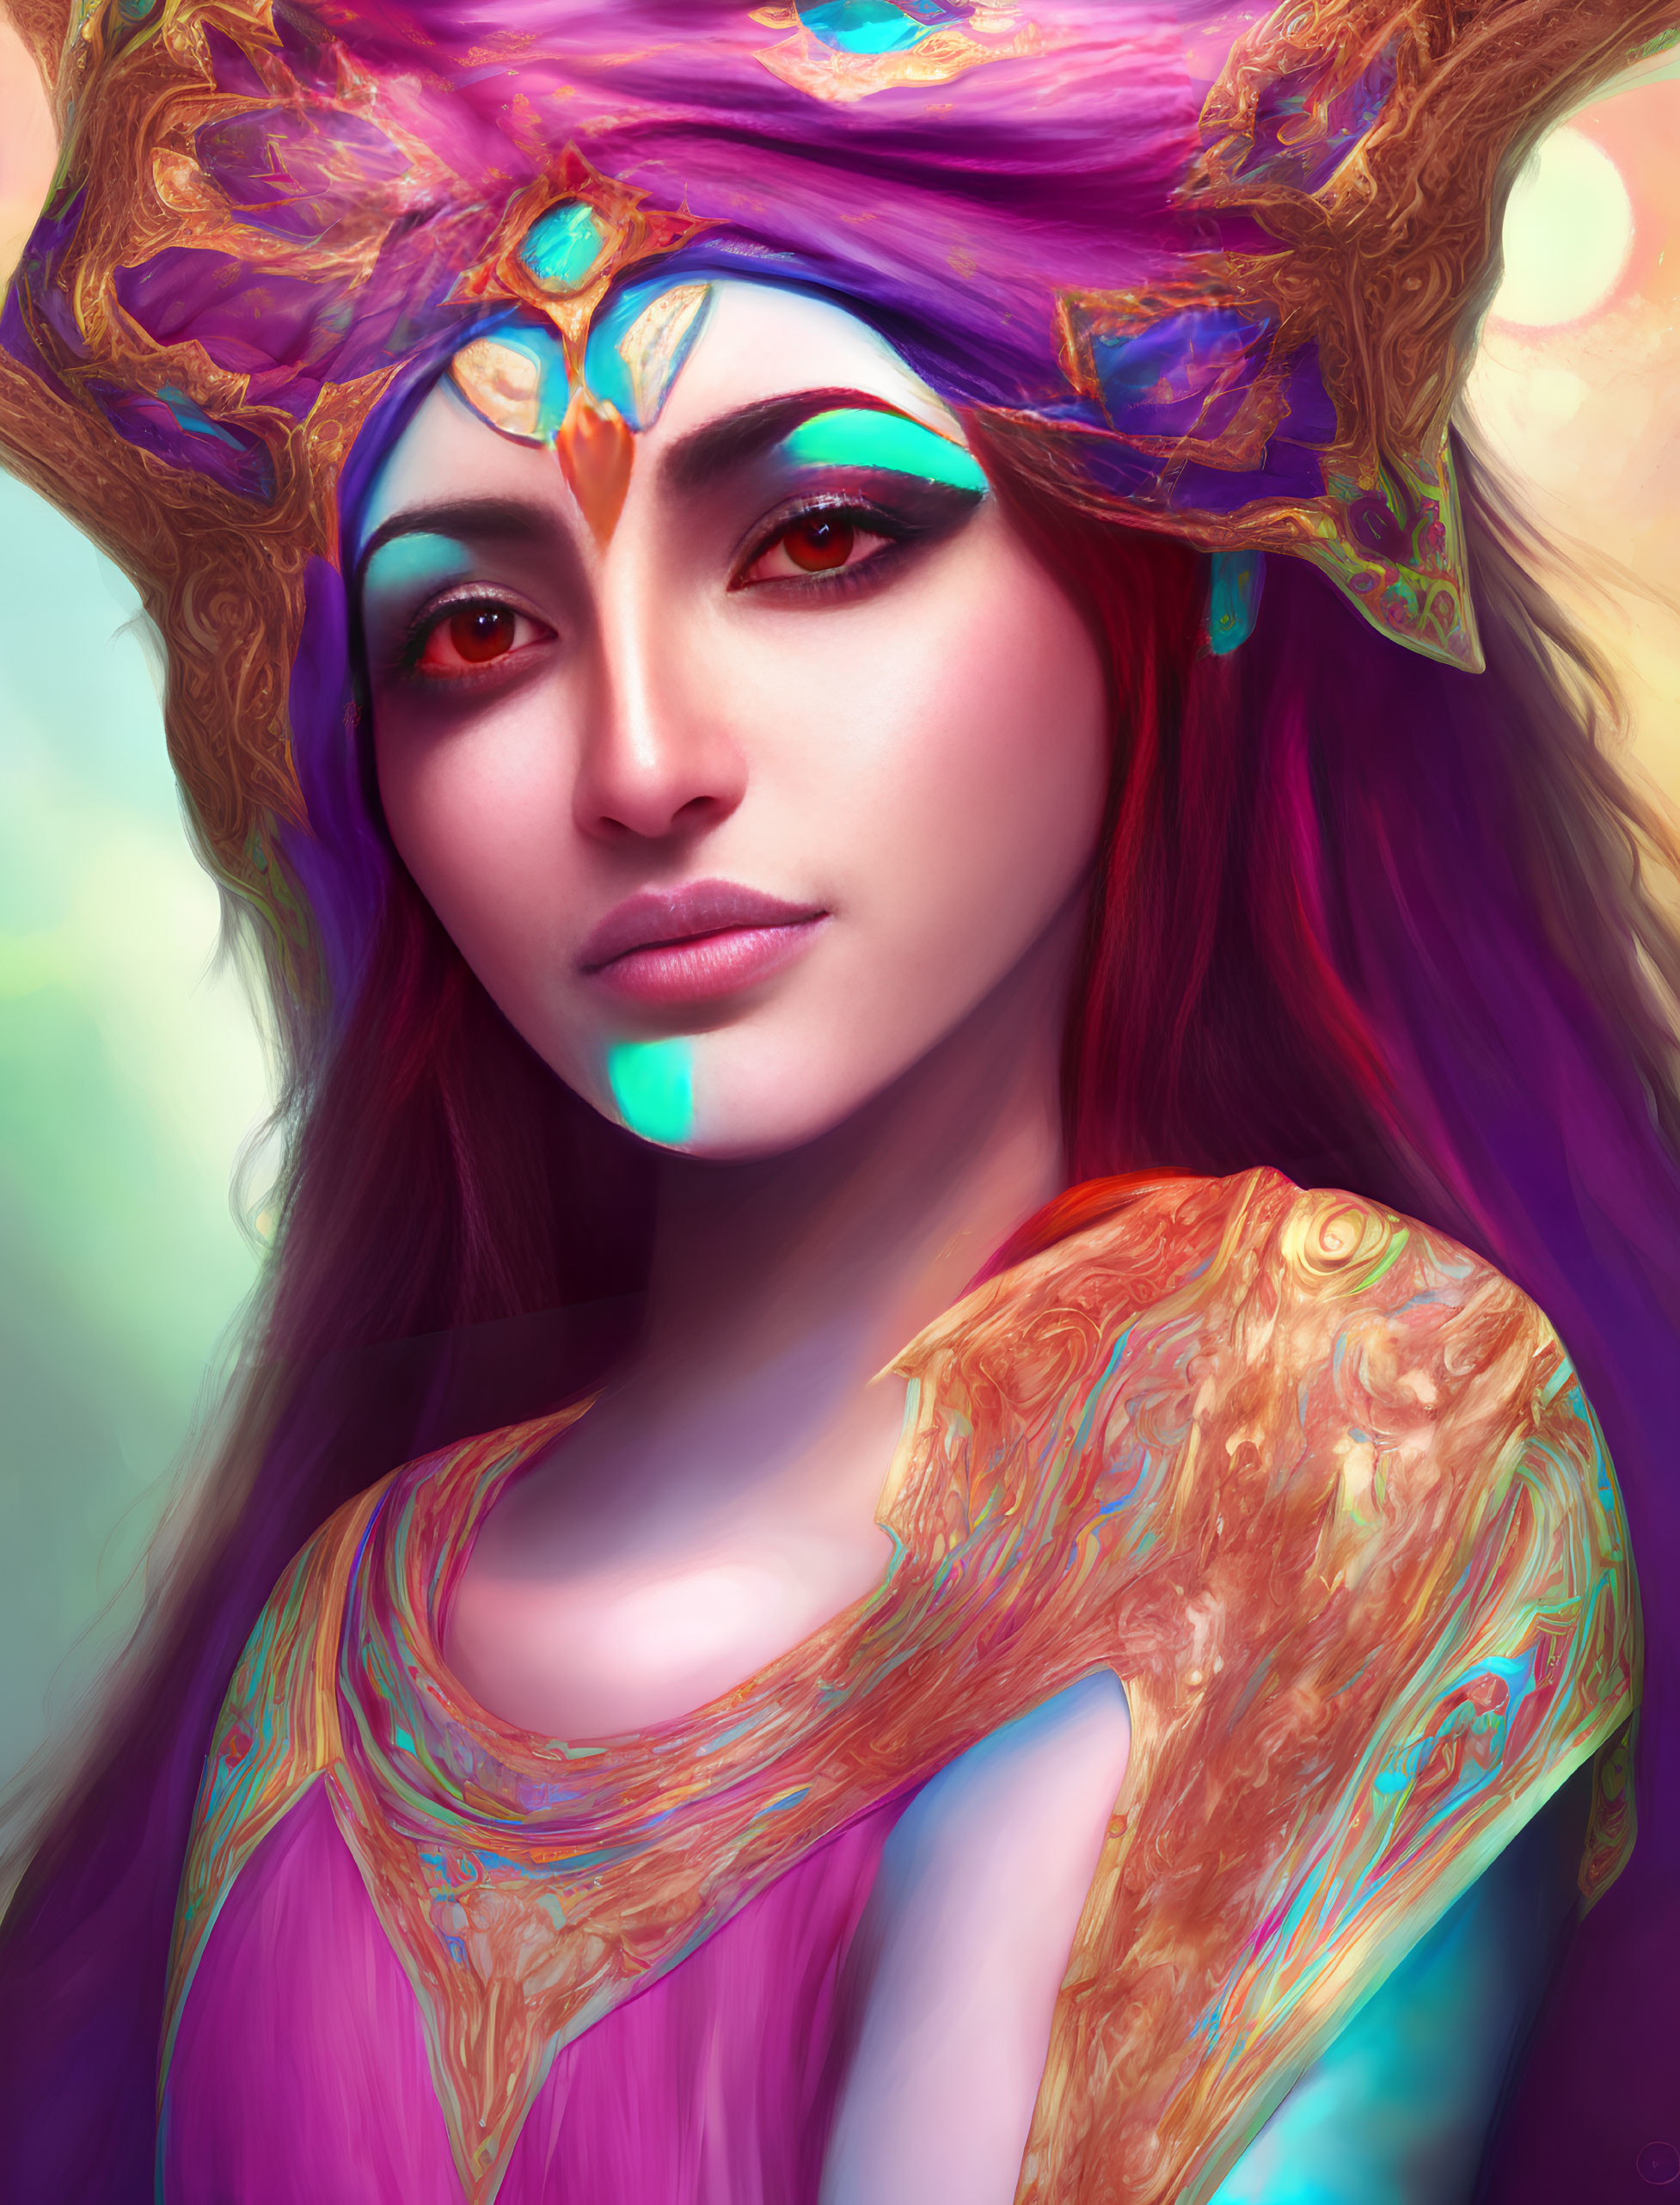 Fantasy-style portrait of a woman with vibrant makeup and ornate headpiece